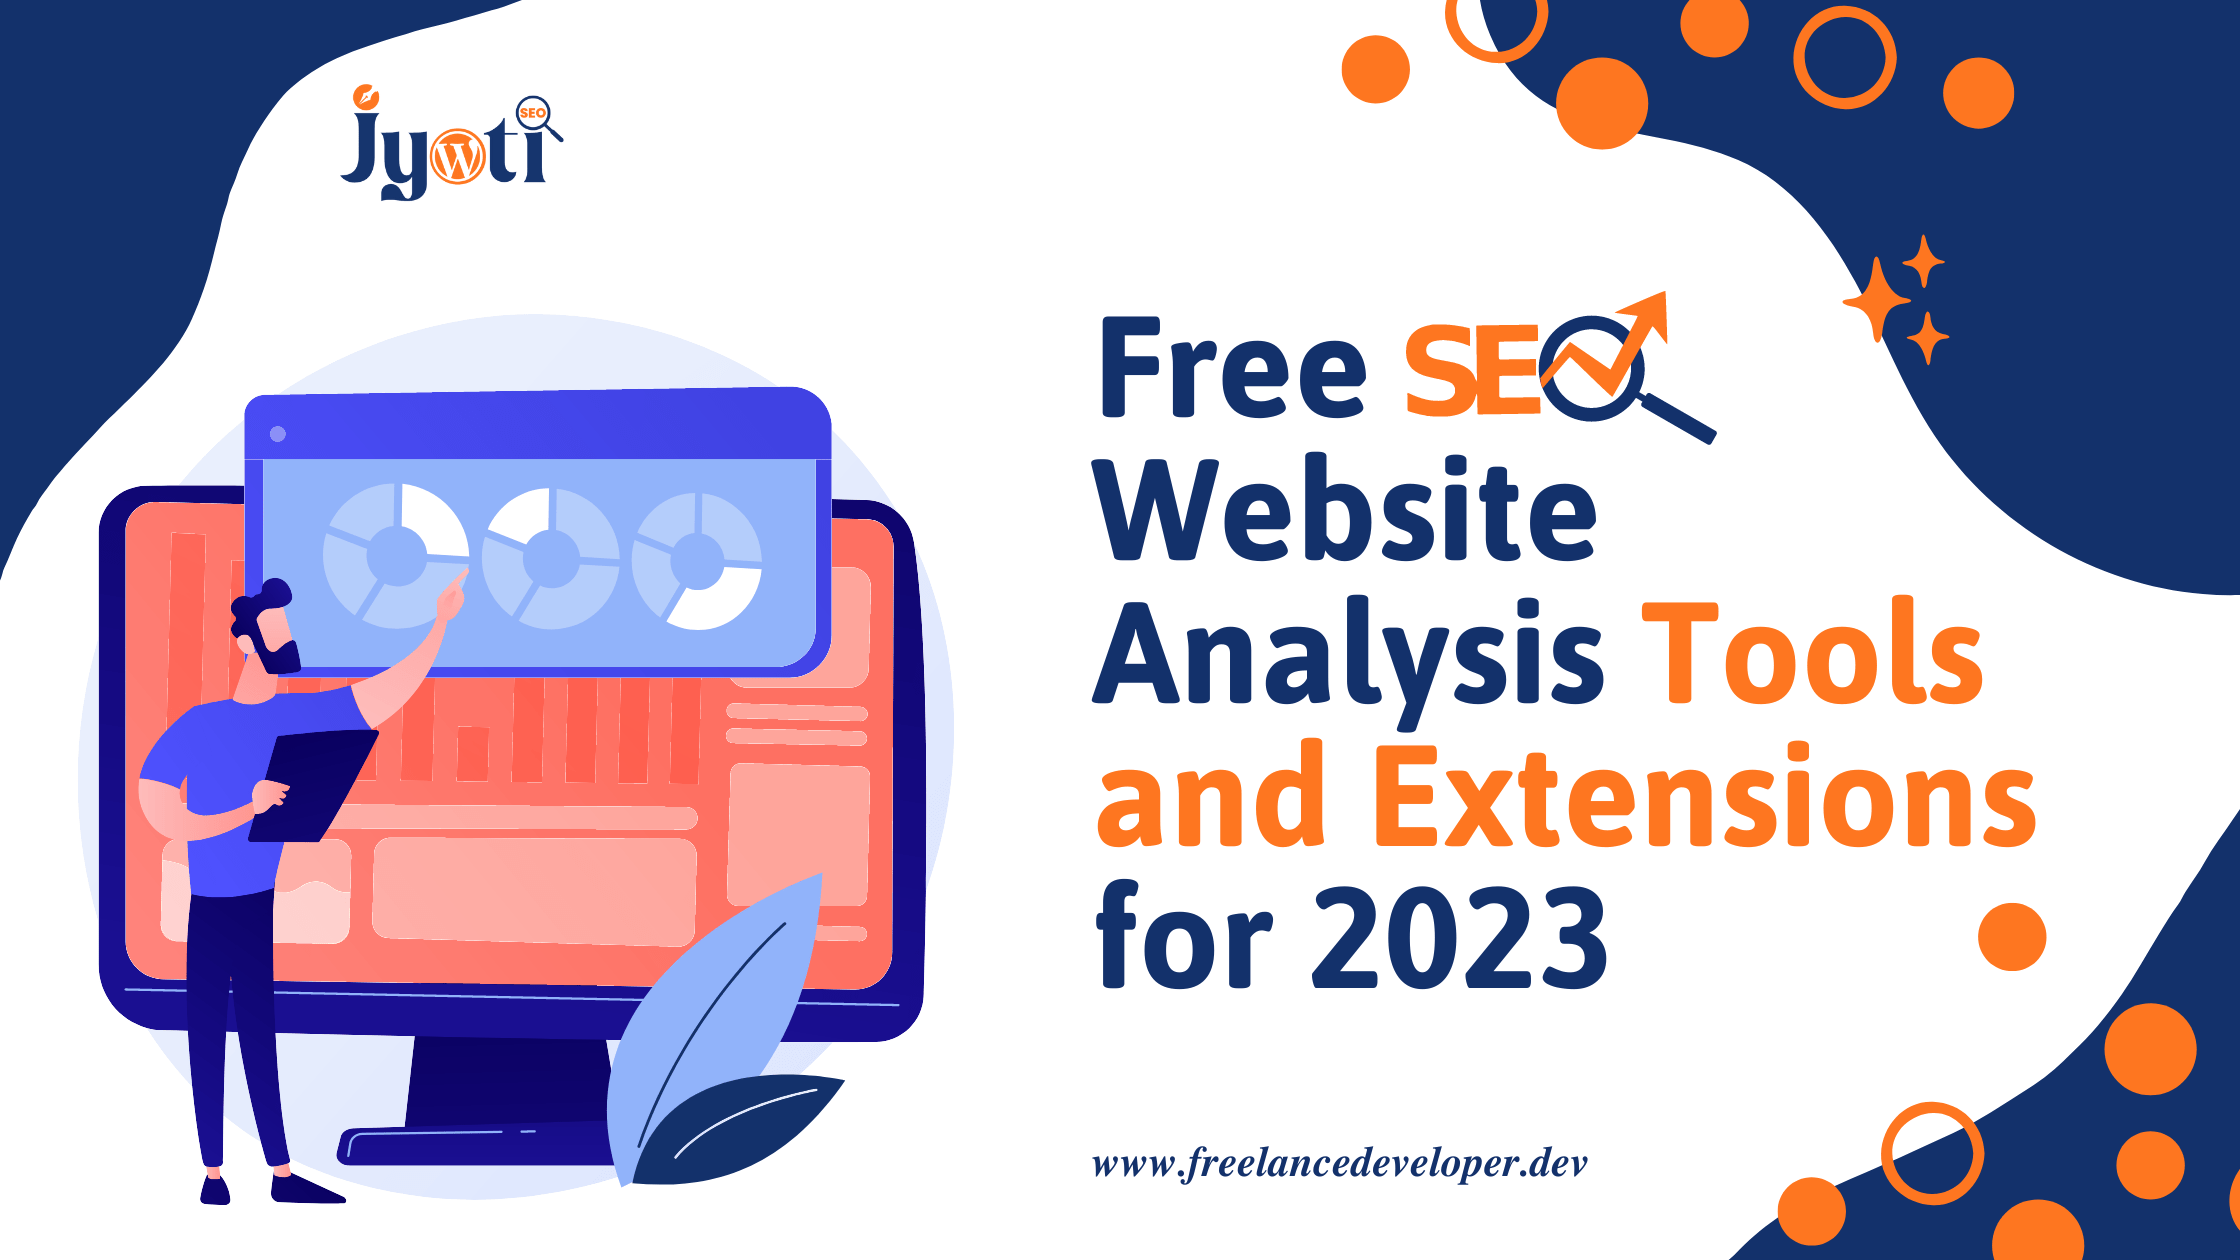 Free SEO Website Analysis Tools and Extensions for 2023